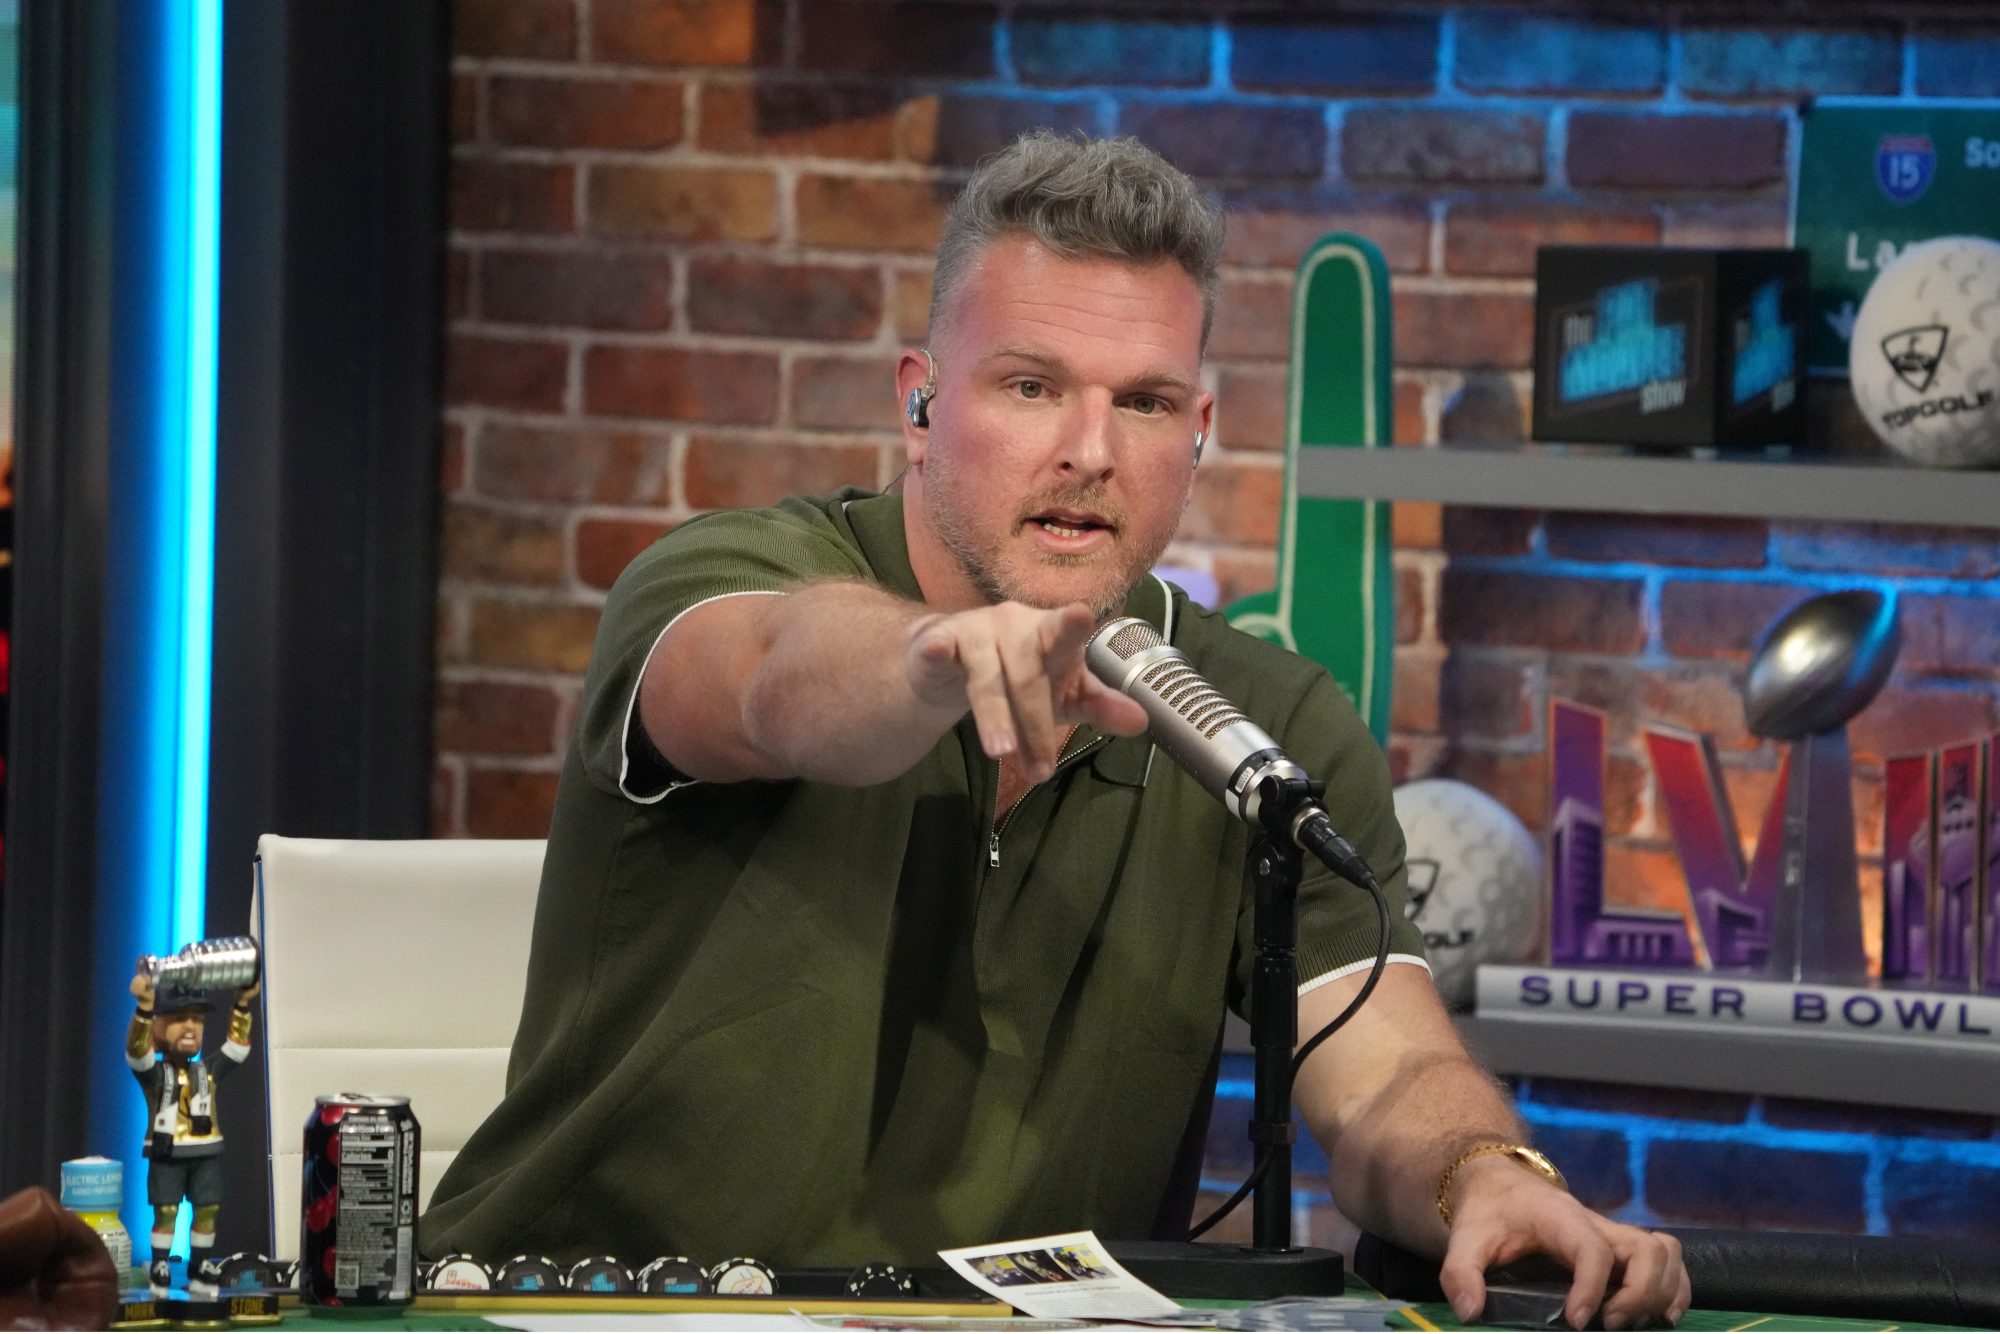 Pat McAfee tees off on ESPN executive, claims he has no 'motherf